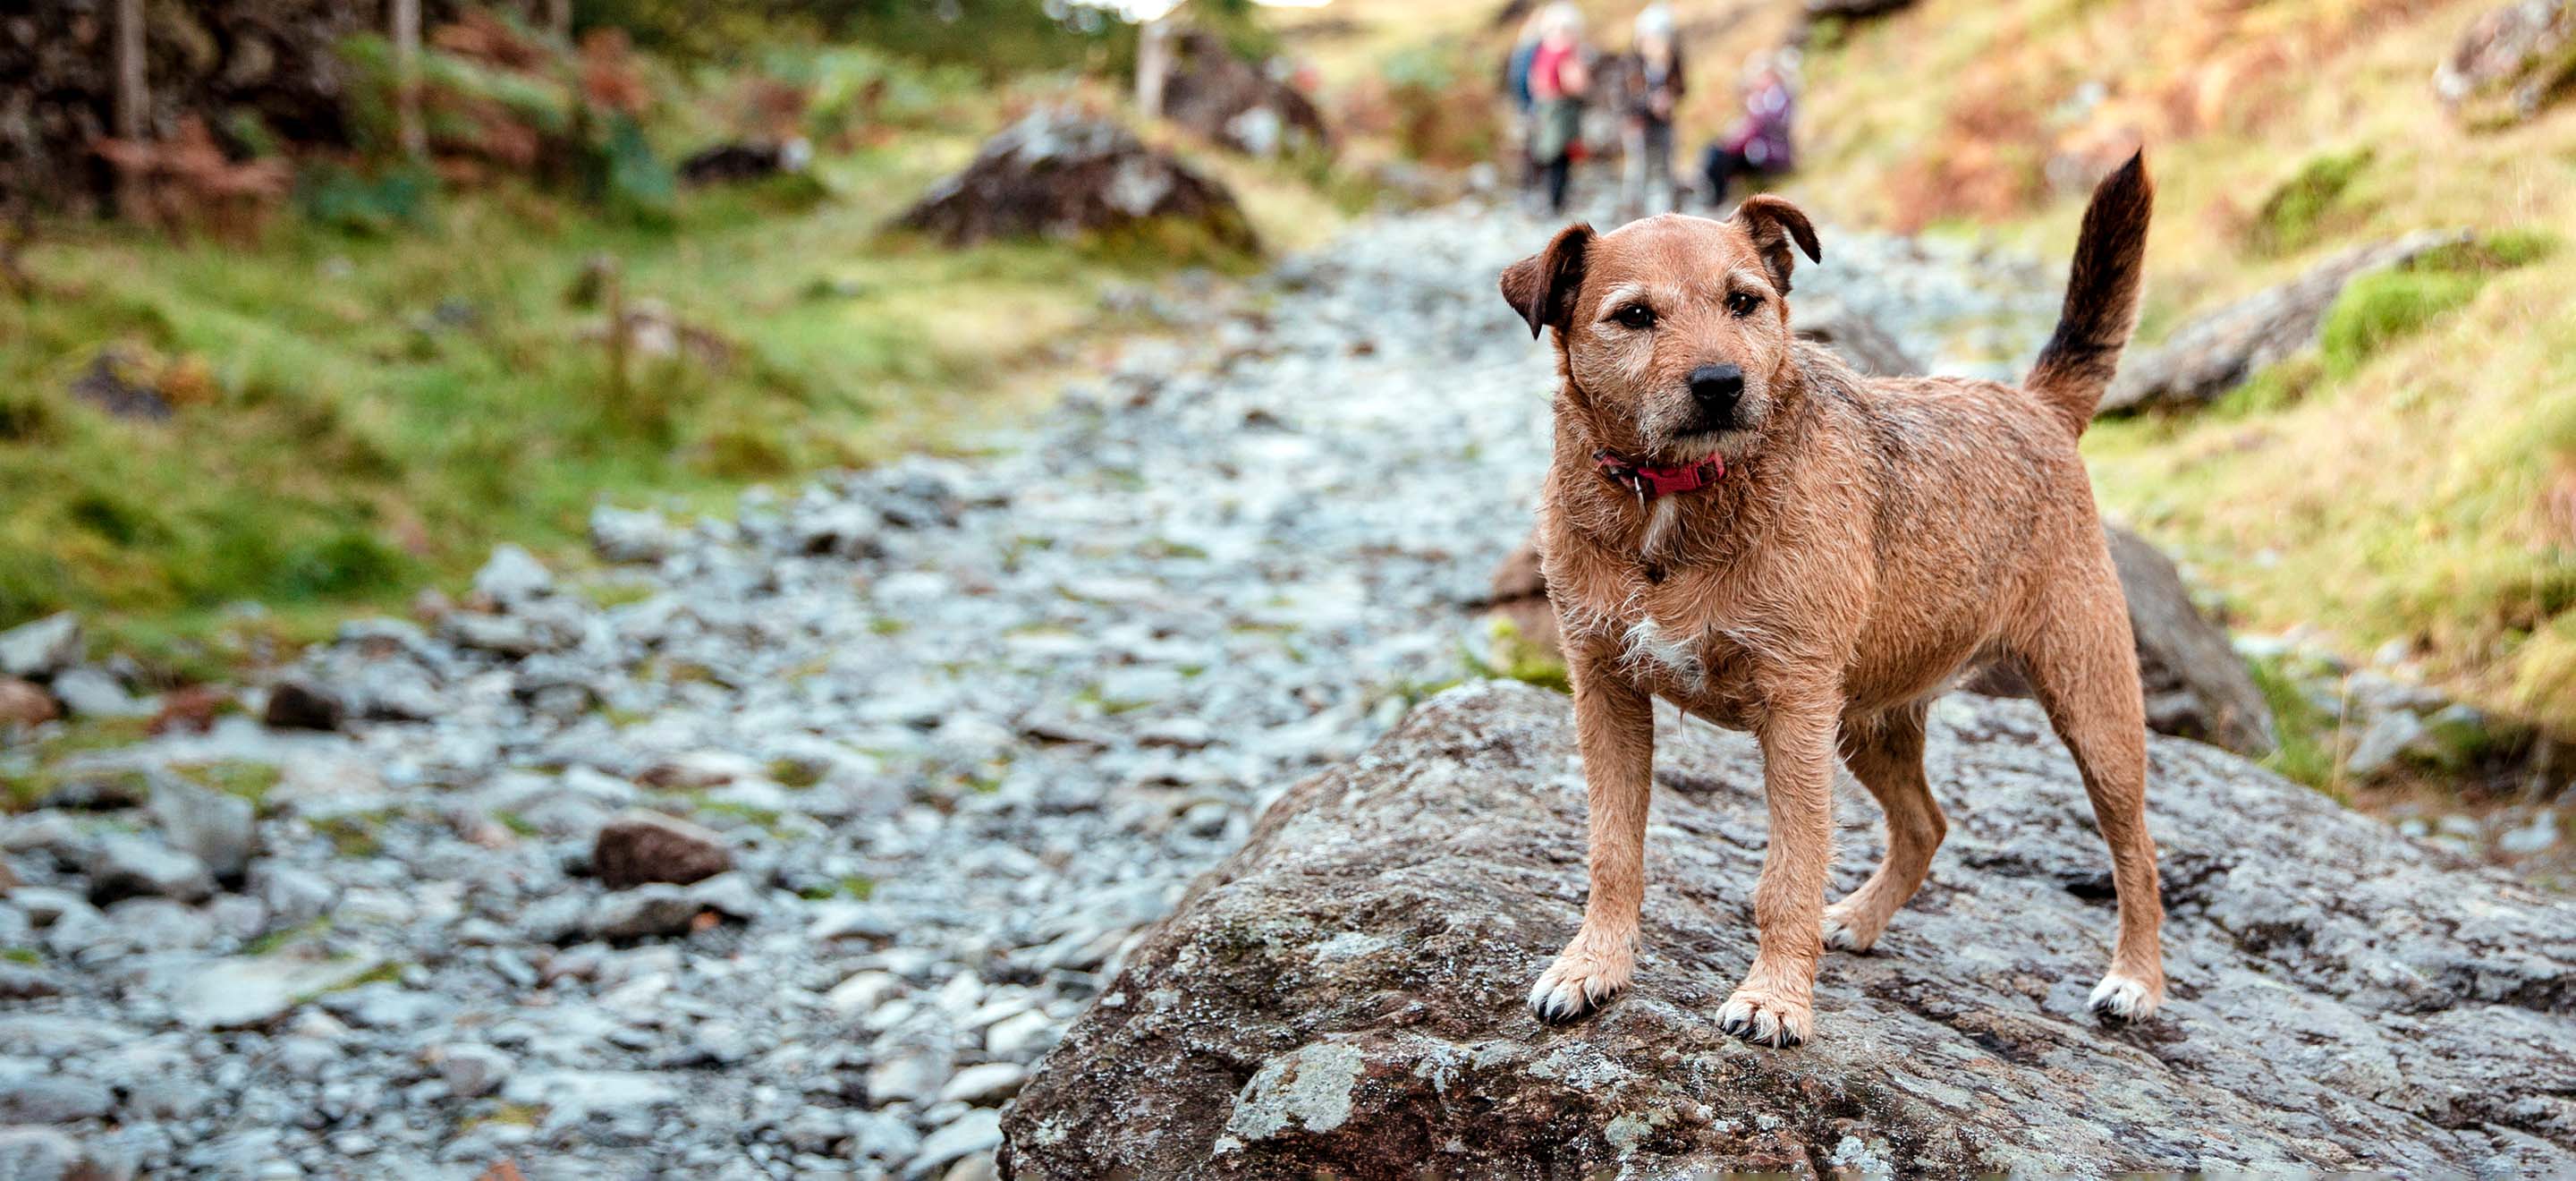 A Patterdale Fell Terrier dog standing on a rock on a hiking trail in the woods image